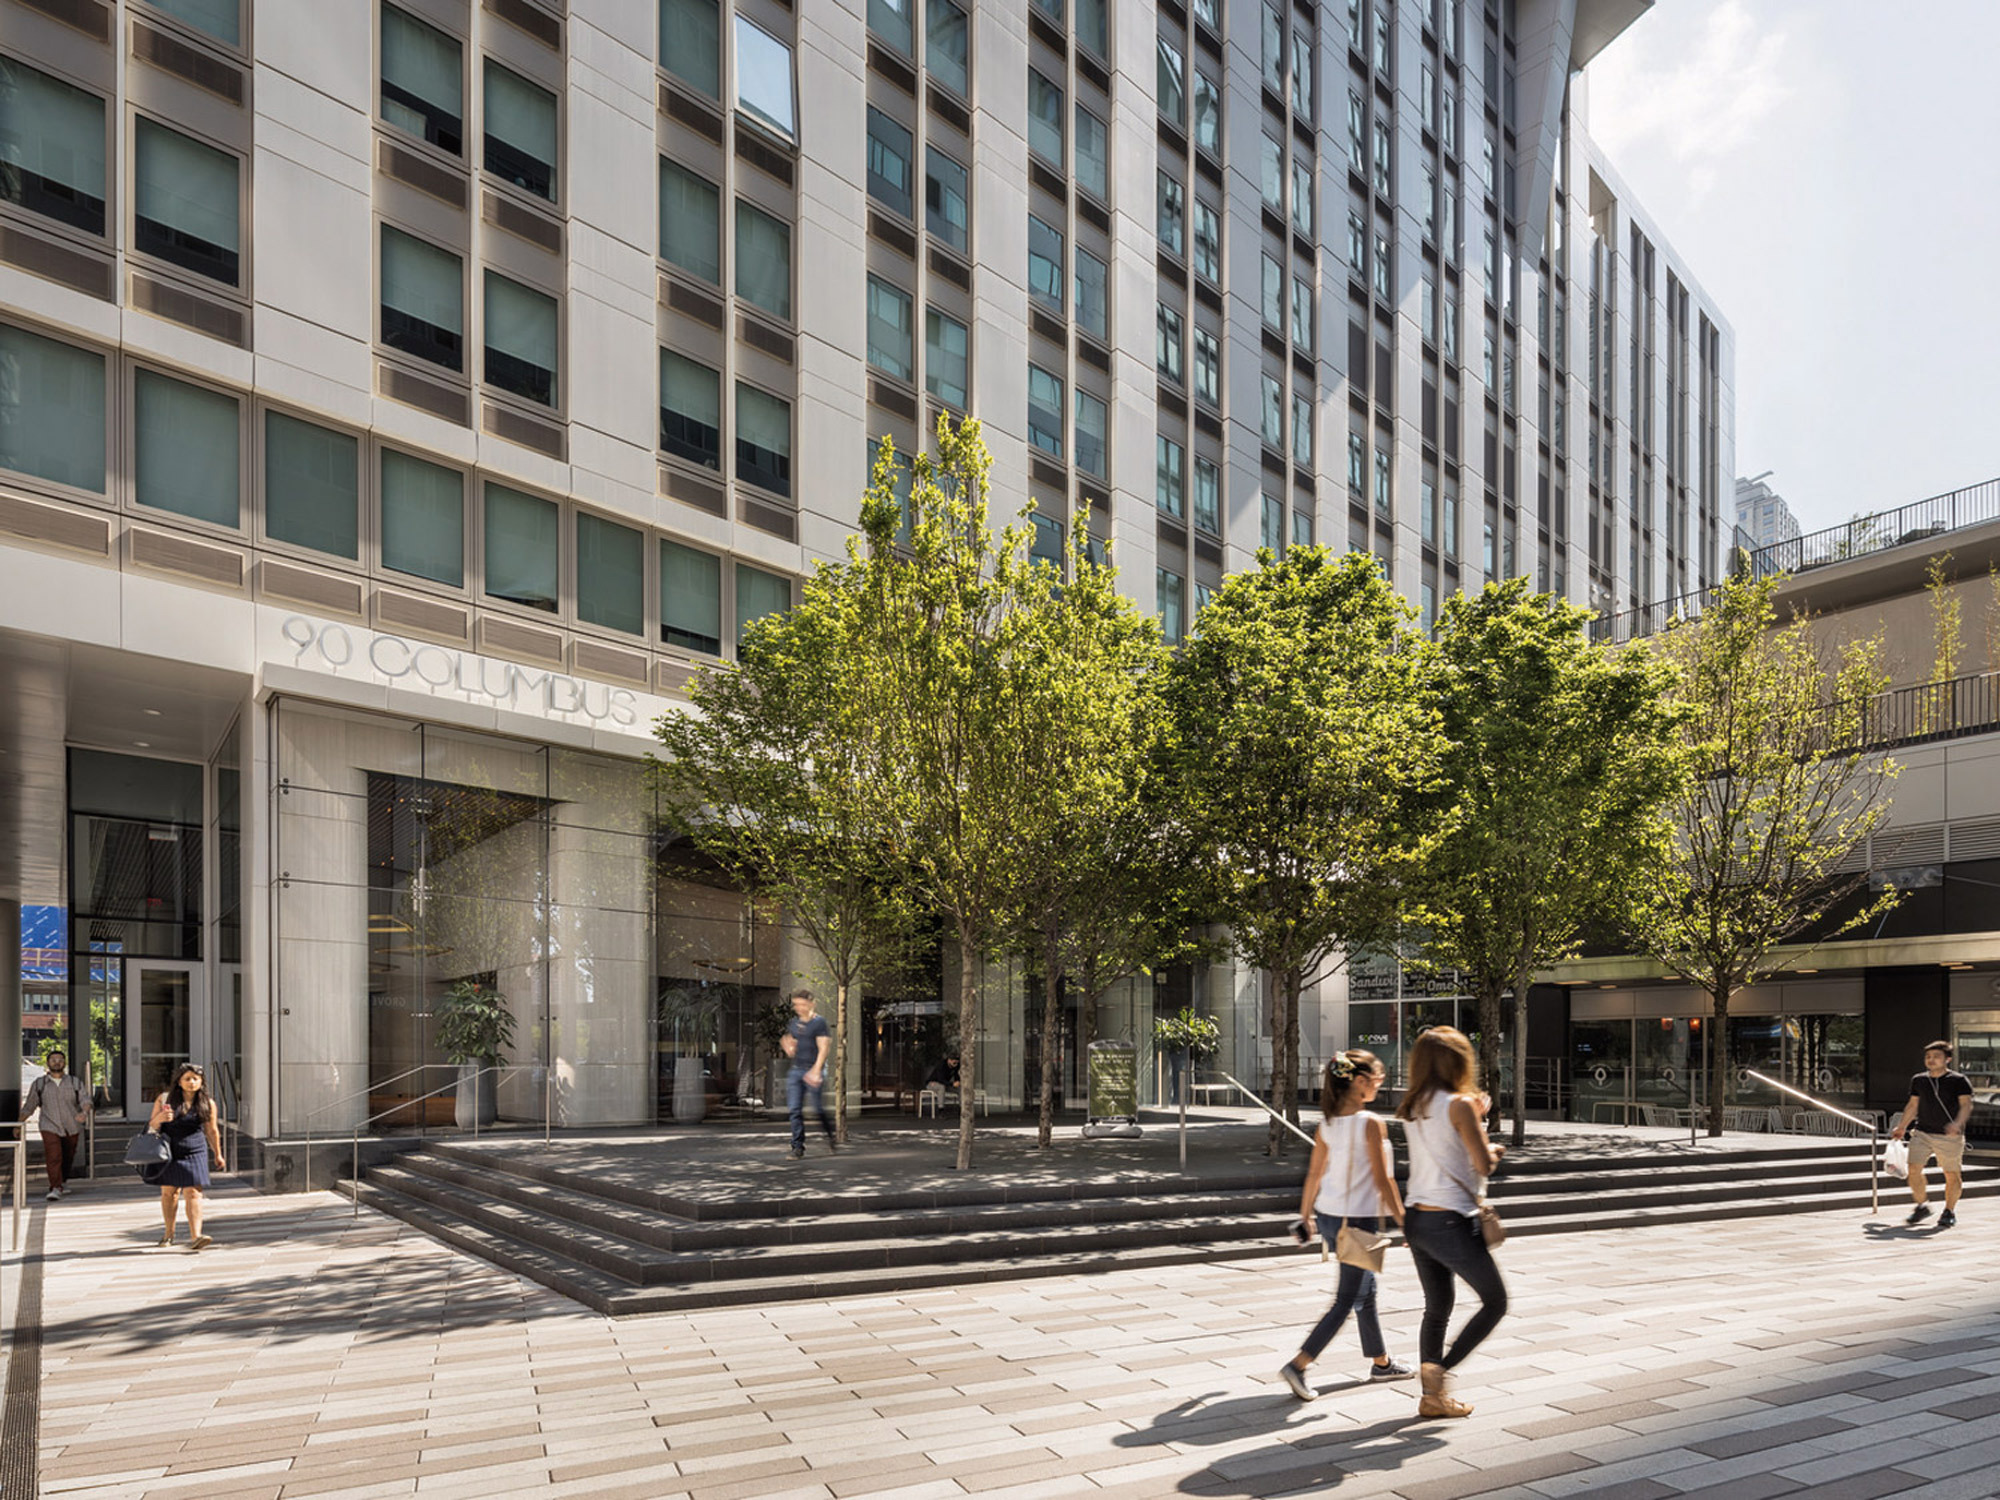 Modern urban streetscape with pedestrians, highlighting a sleek building facade featuring a mix of glass and stone elements, accented by a series of deciduous trees and an inviting entryway marked by a prominent address sign.